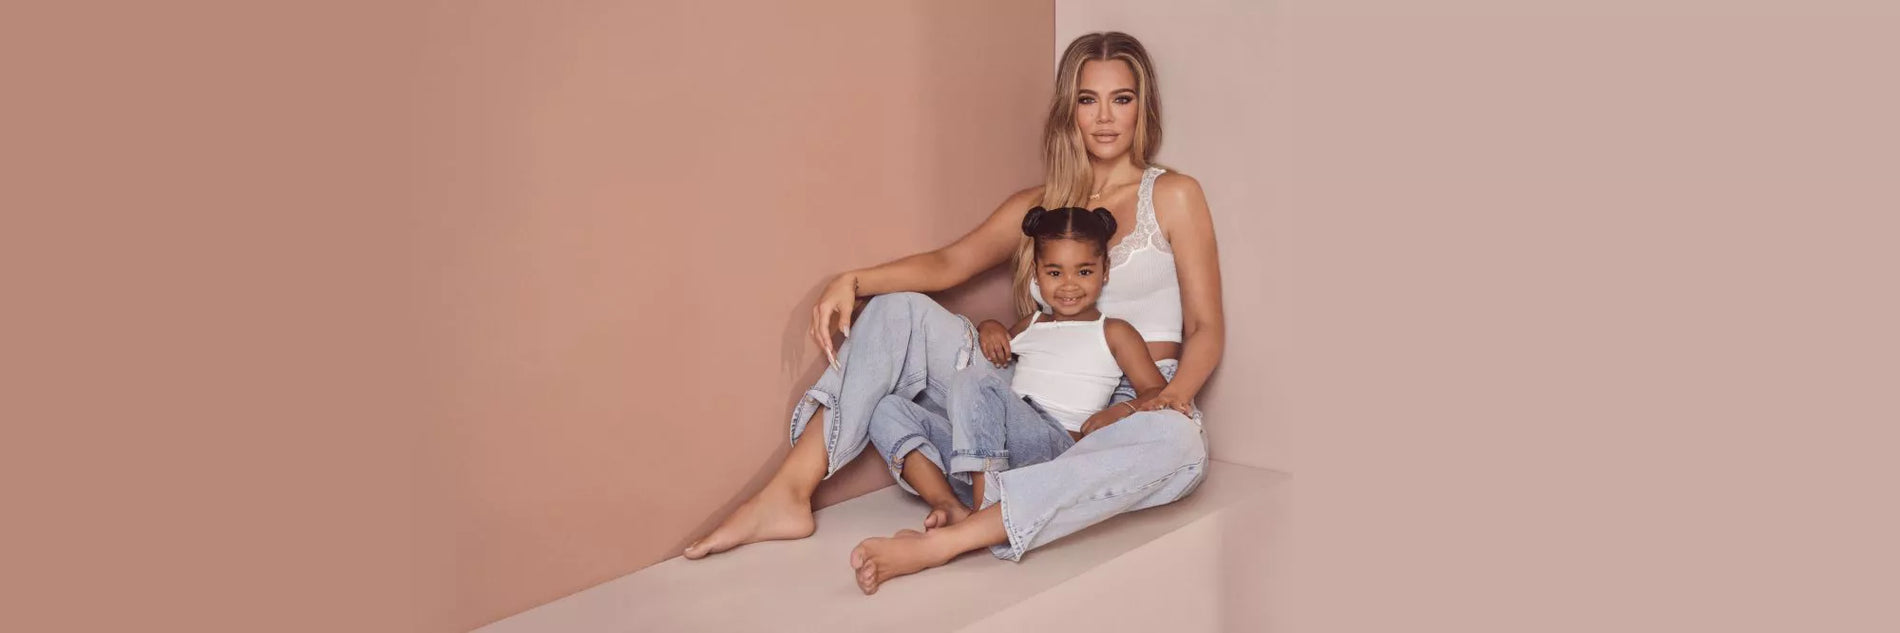 On her fifth birthday, see Khloe Kardashian's daughter True Thompson all grown up.